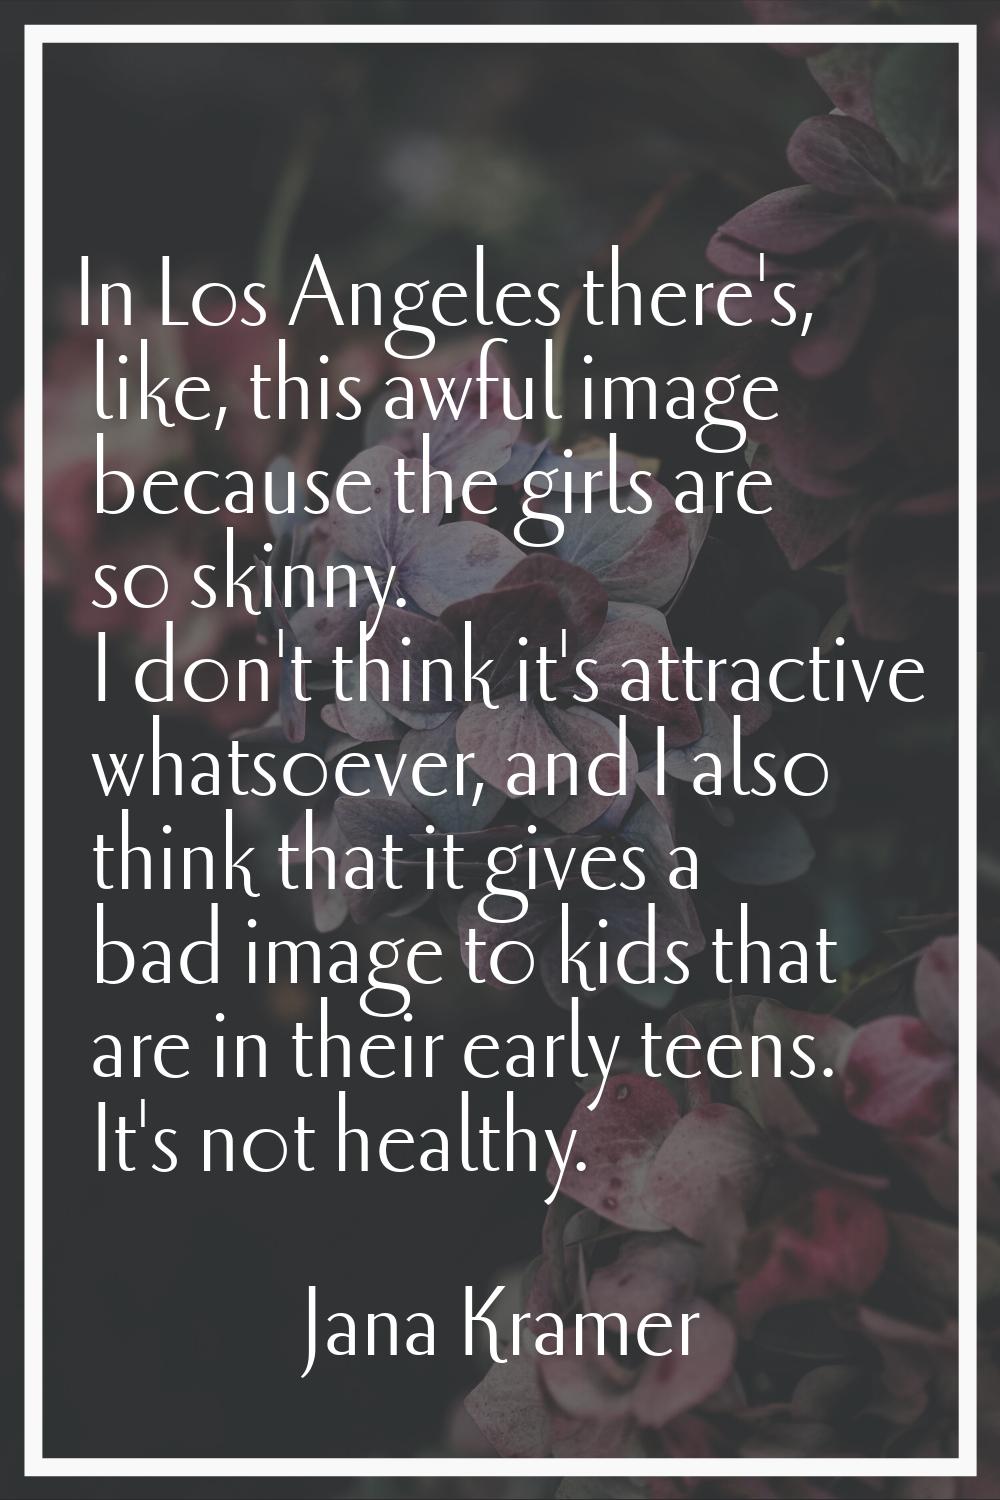 In Los Angeles there's, like, this awful image because the girls are so skinny. I don't think it's 